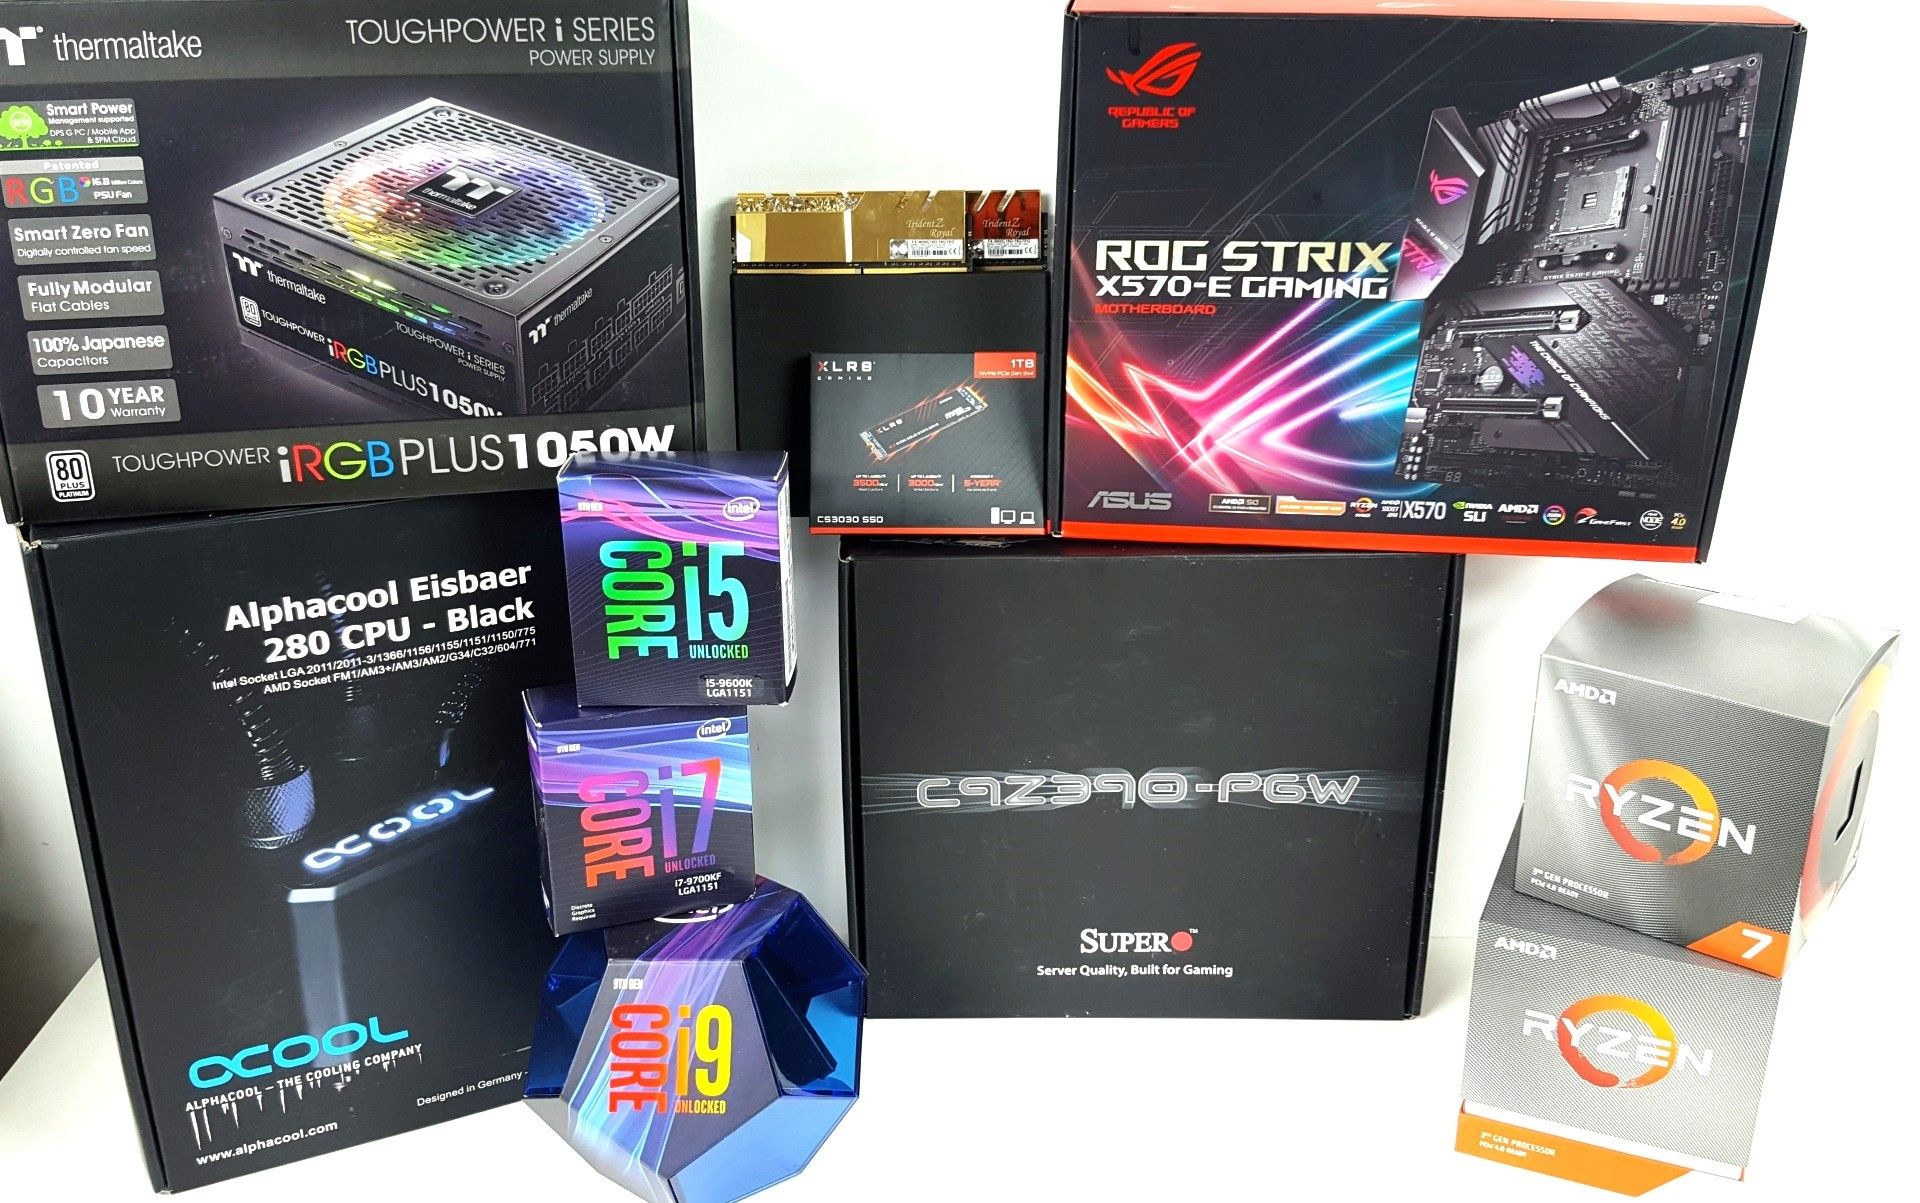 Low-Budget Gaming PC 2020 - What do you get for 400 Euros?